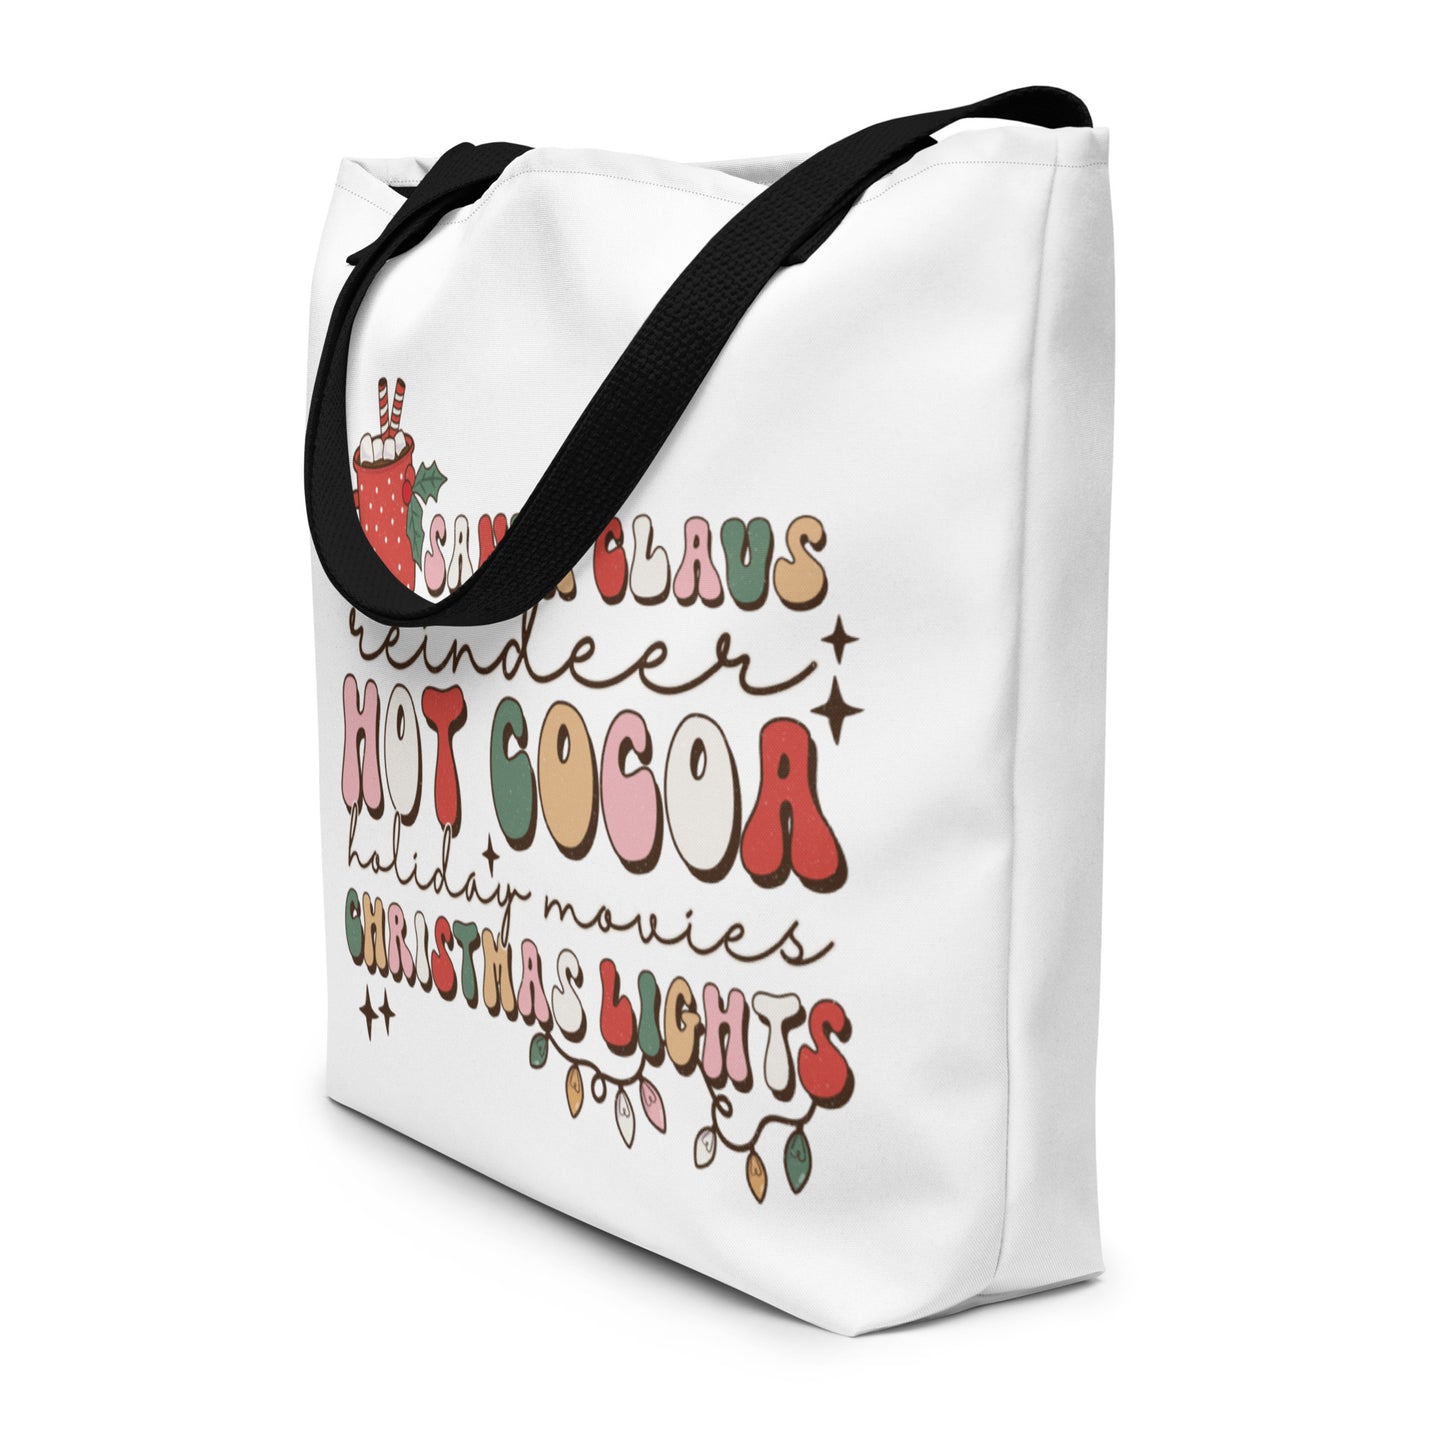 Santa Claus Reindeer Hot Cocoa Holiday Movies Christmas Lights All-Over Print Large Tote Bag